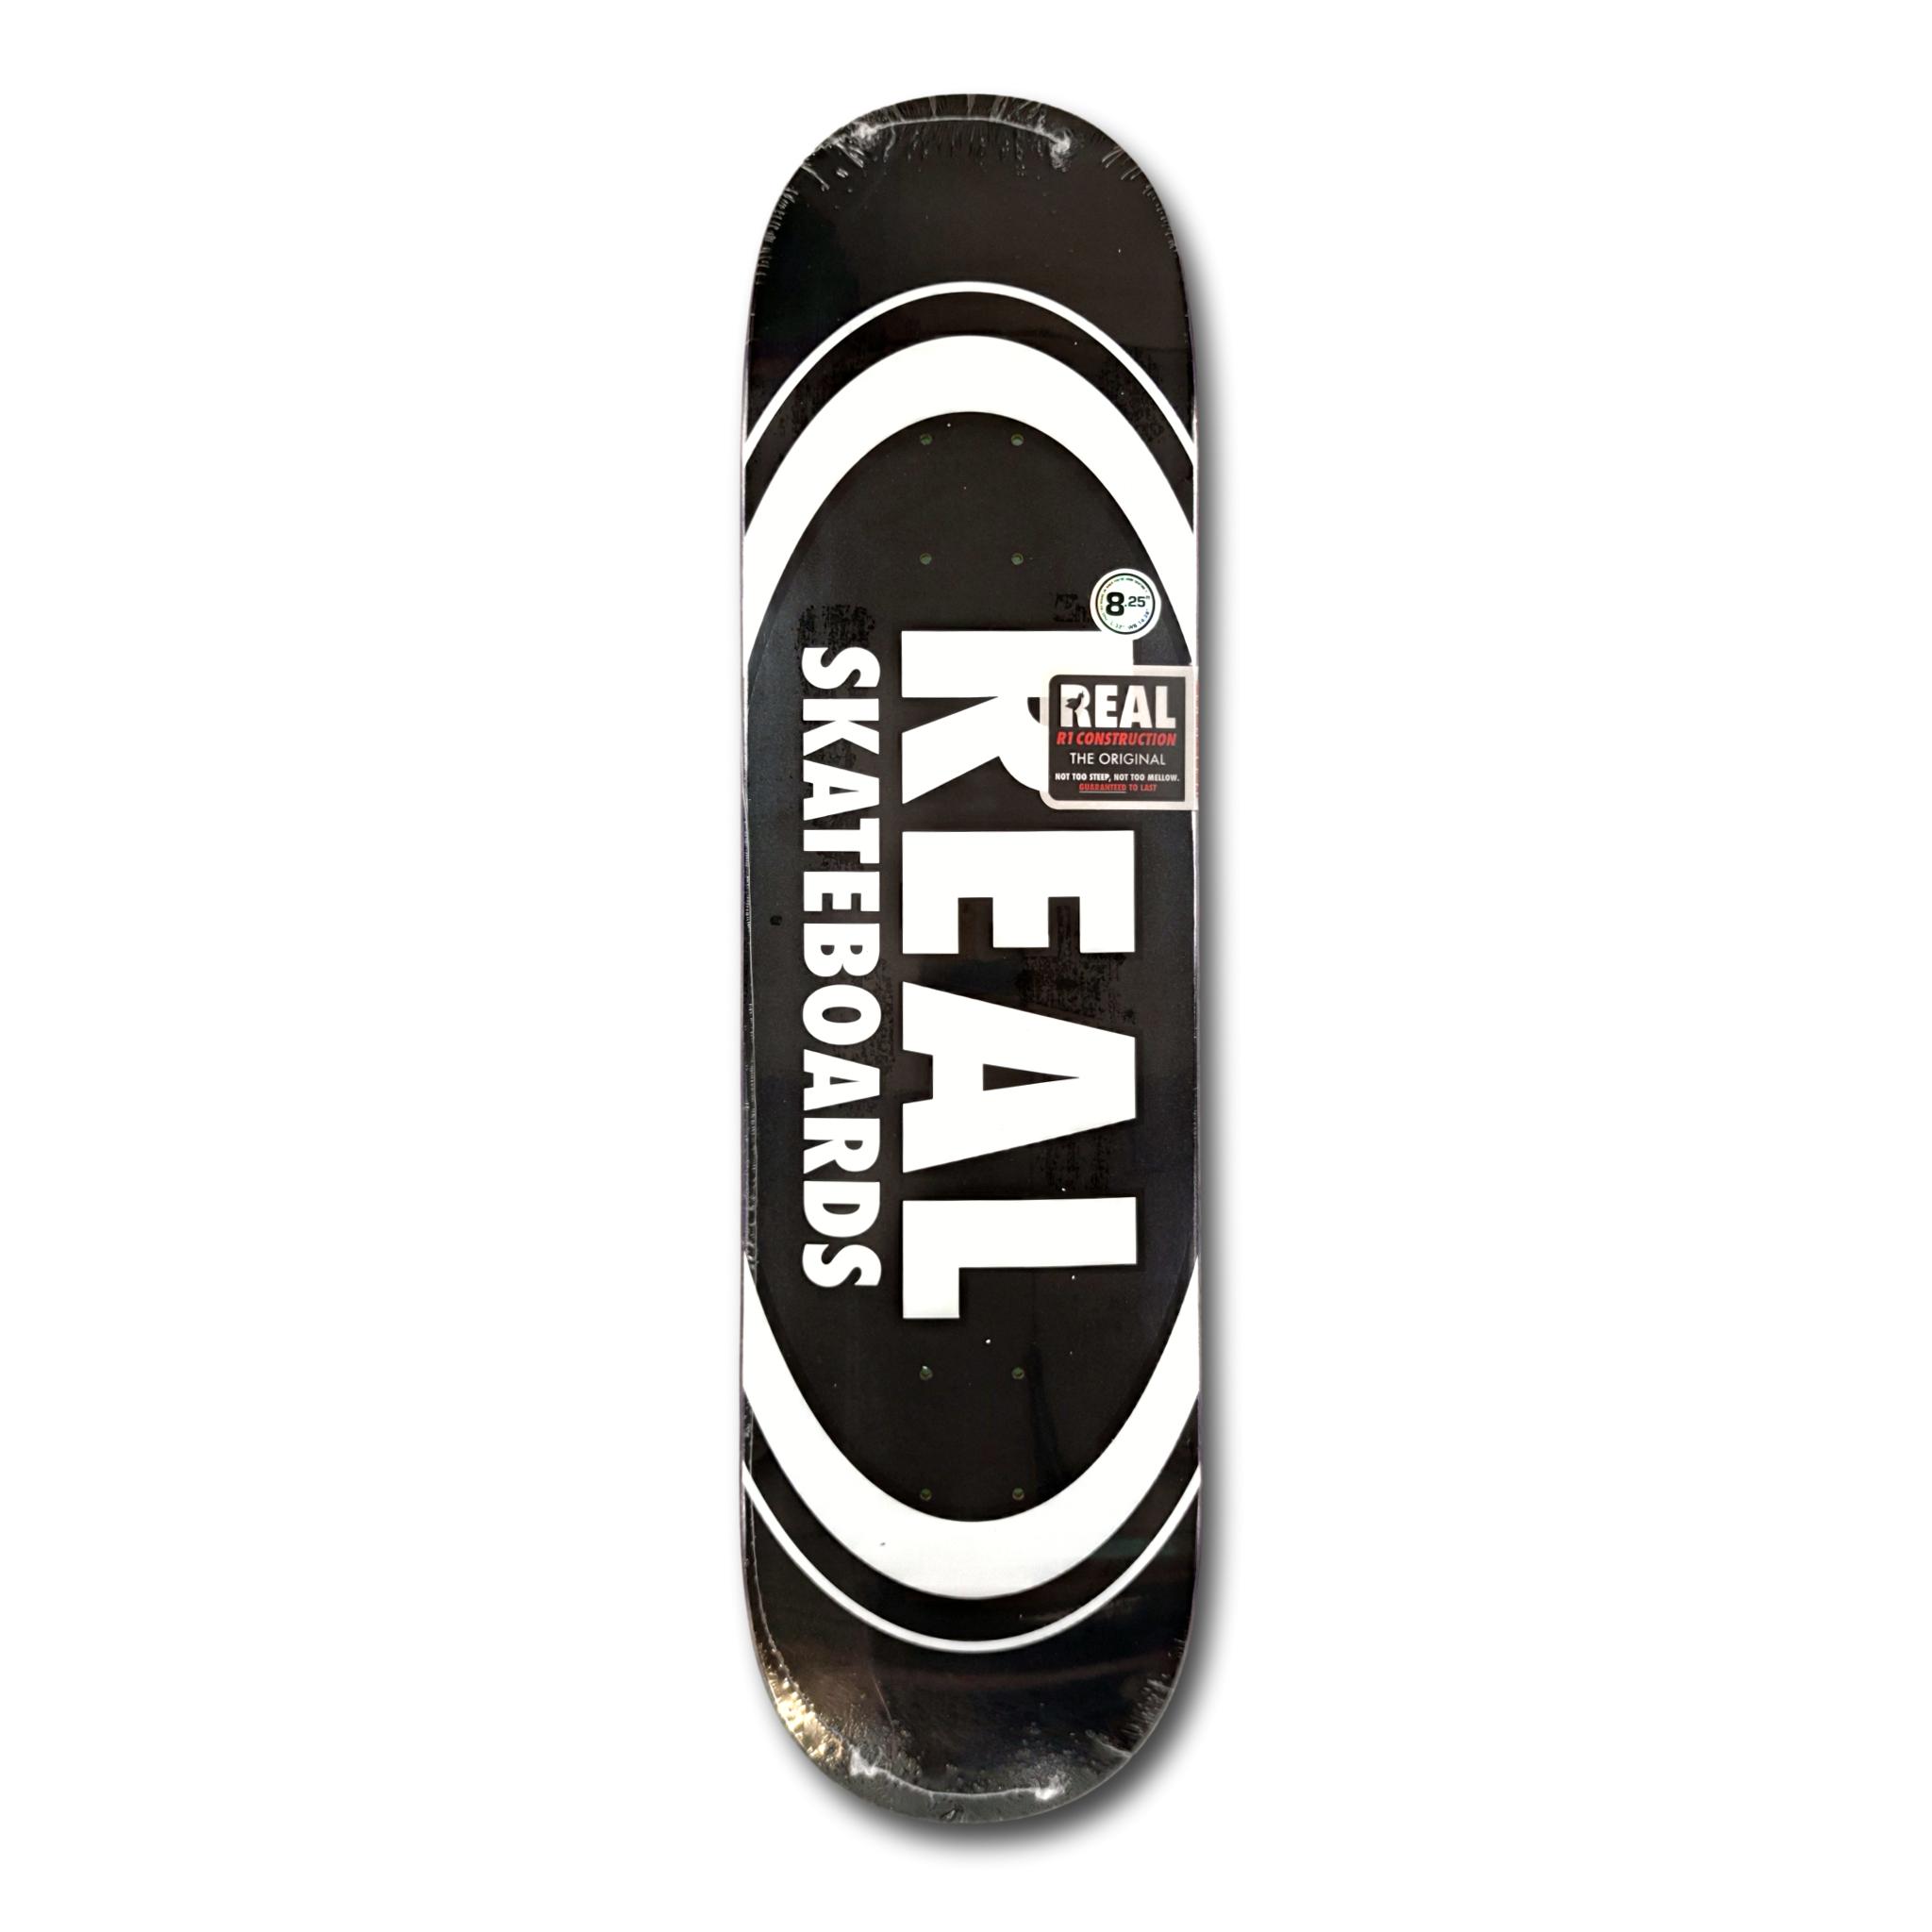 REAL SKATEBOARDS TEAM OVAL CLASSIC 8.25